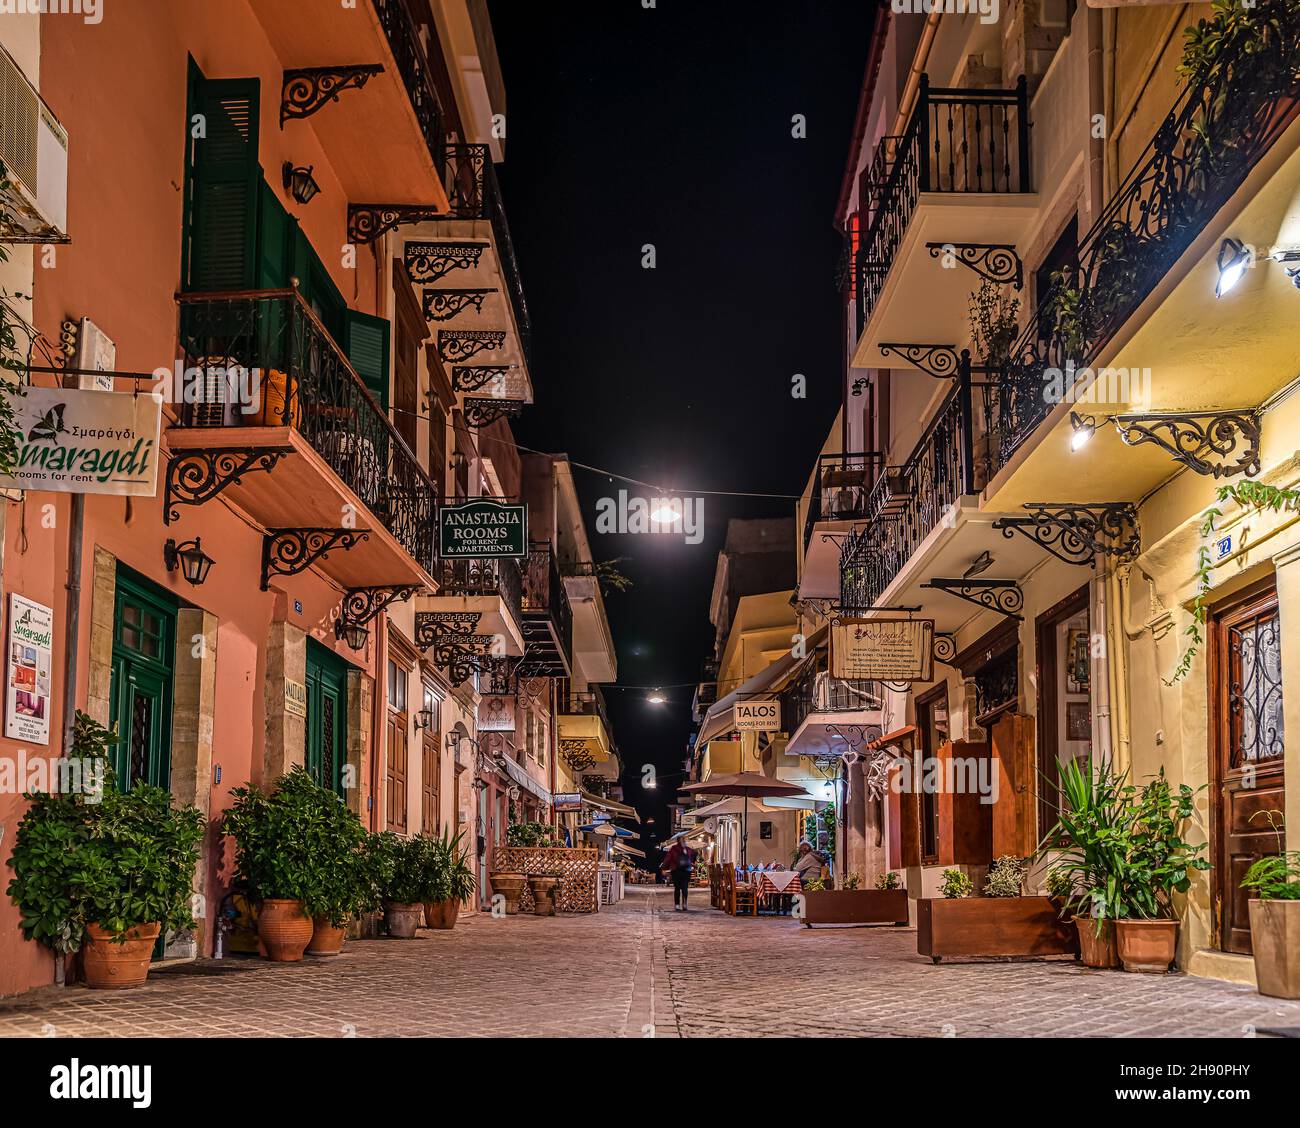 Illuminated Street with hotels and restaurants in the old town of Chania, Crete, Greece, October 16, 2021 Stock Photo